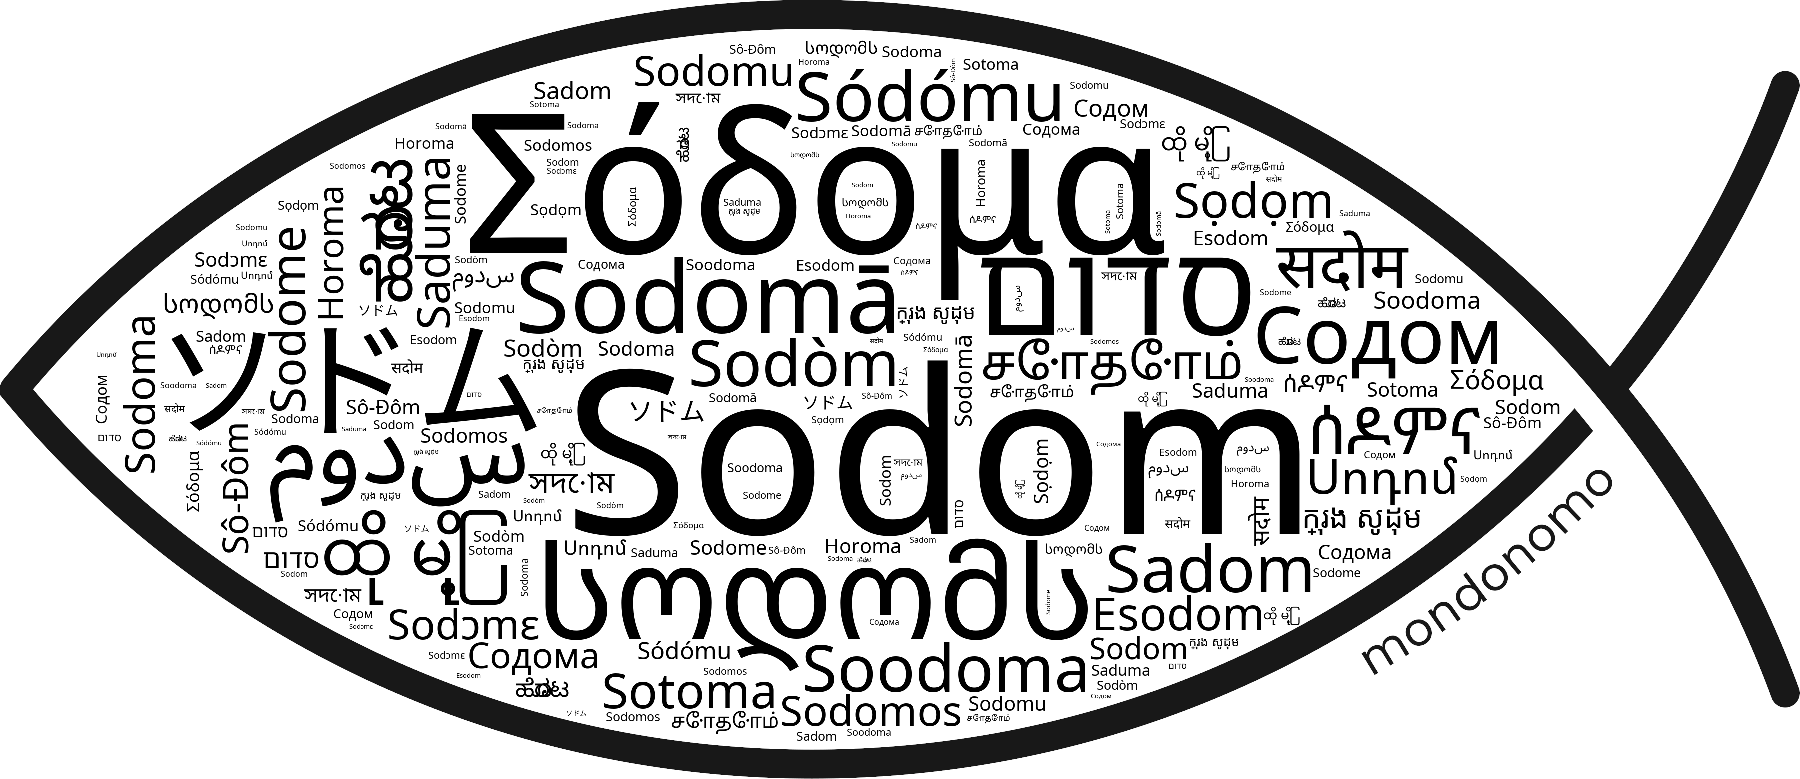 Name Sodom in the world's Bibles